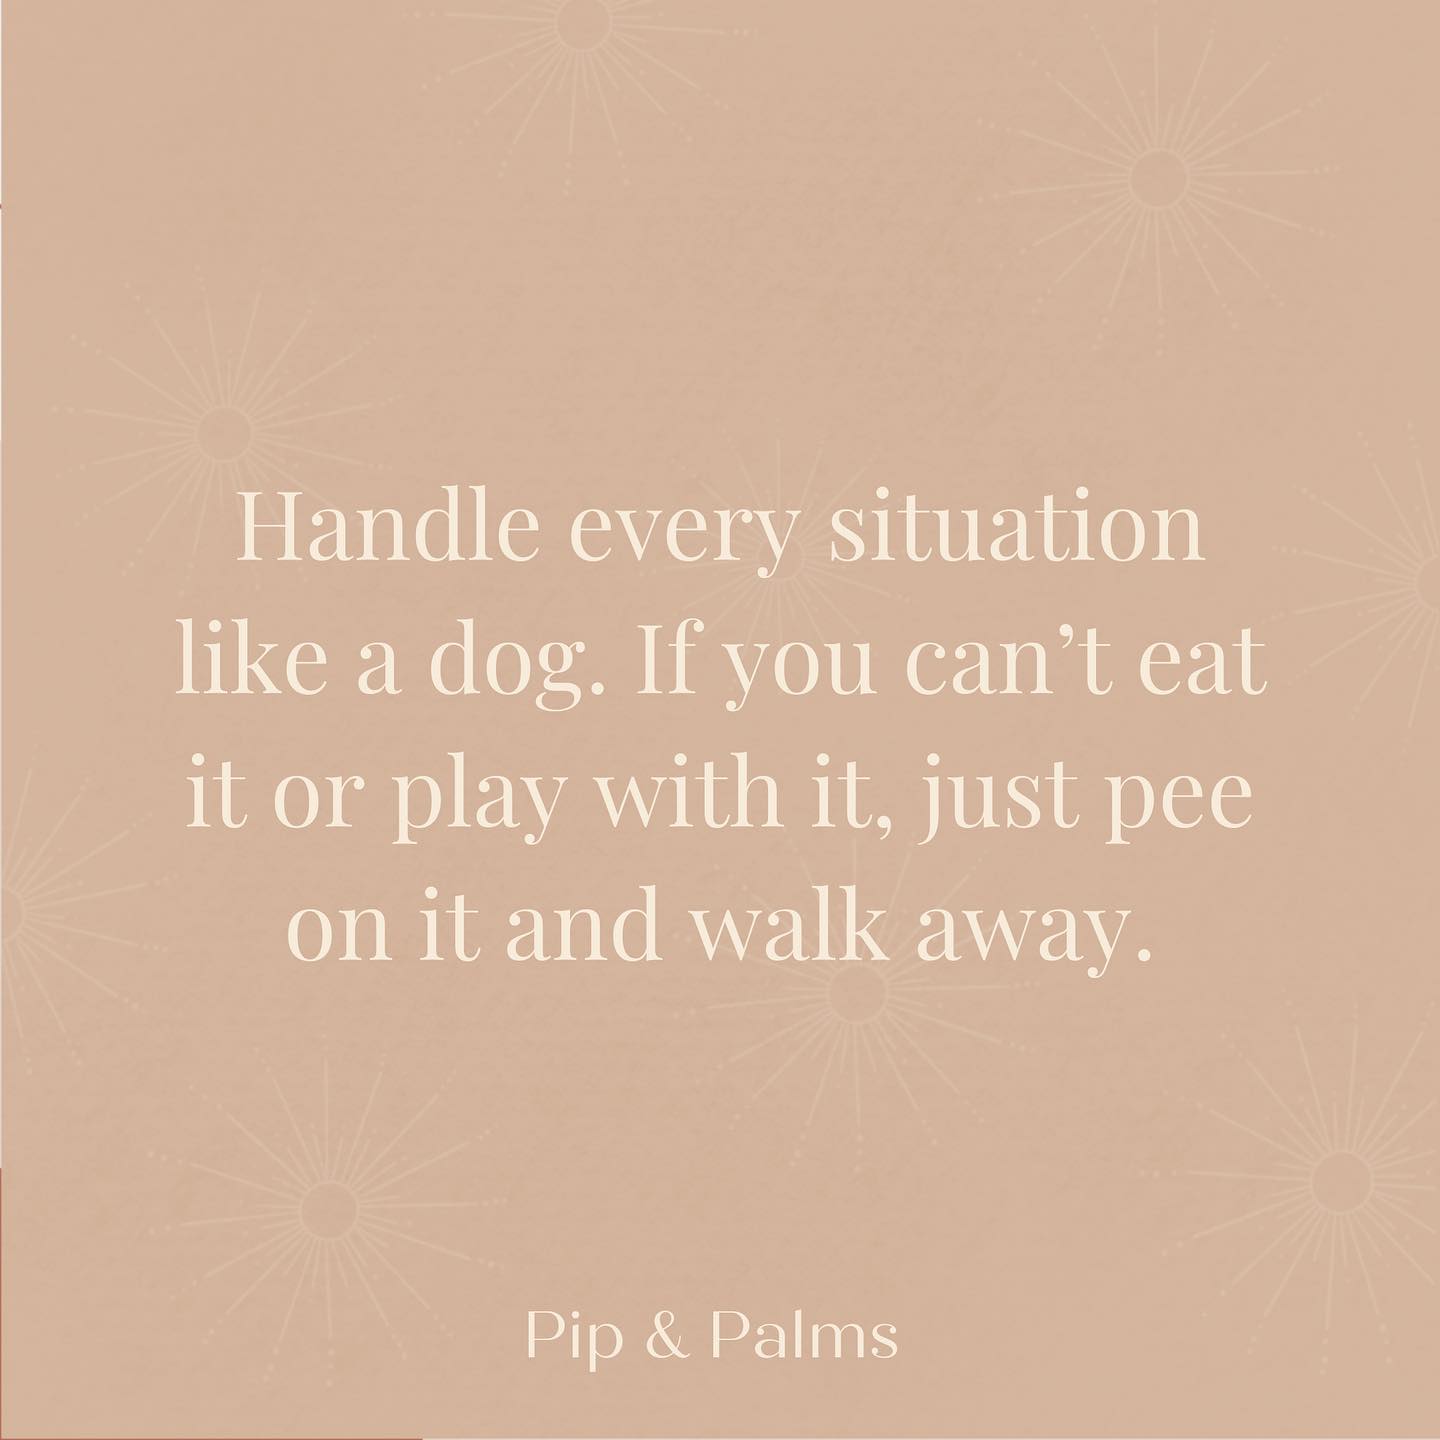 Handle every situation like a dog. If you can’t eat it or play with it, just pee on it and walk away. 🐕